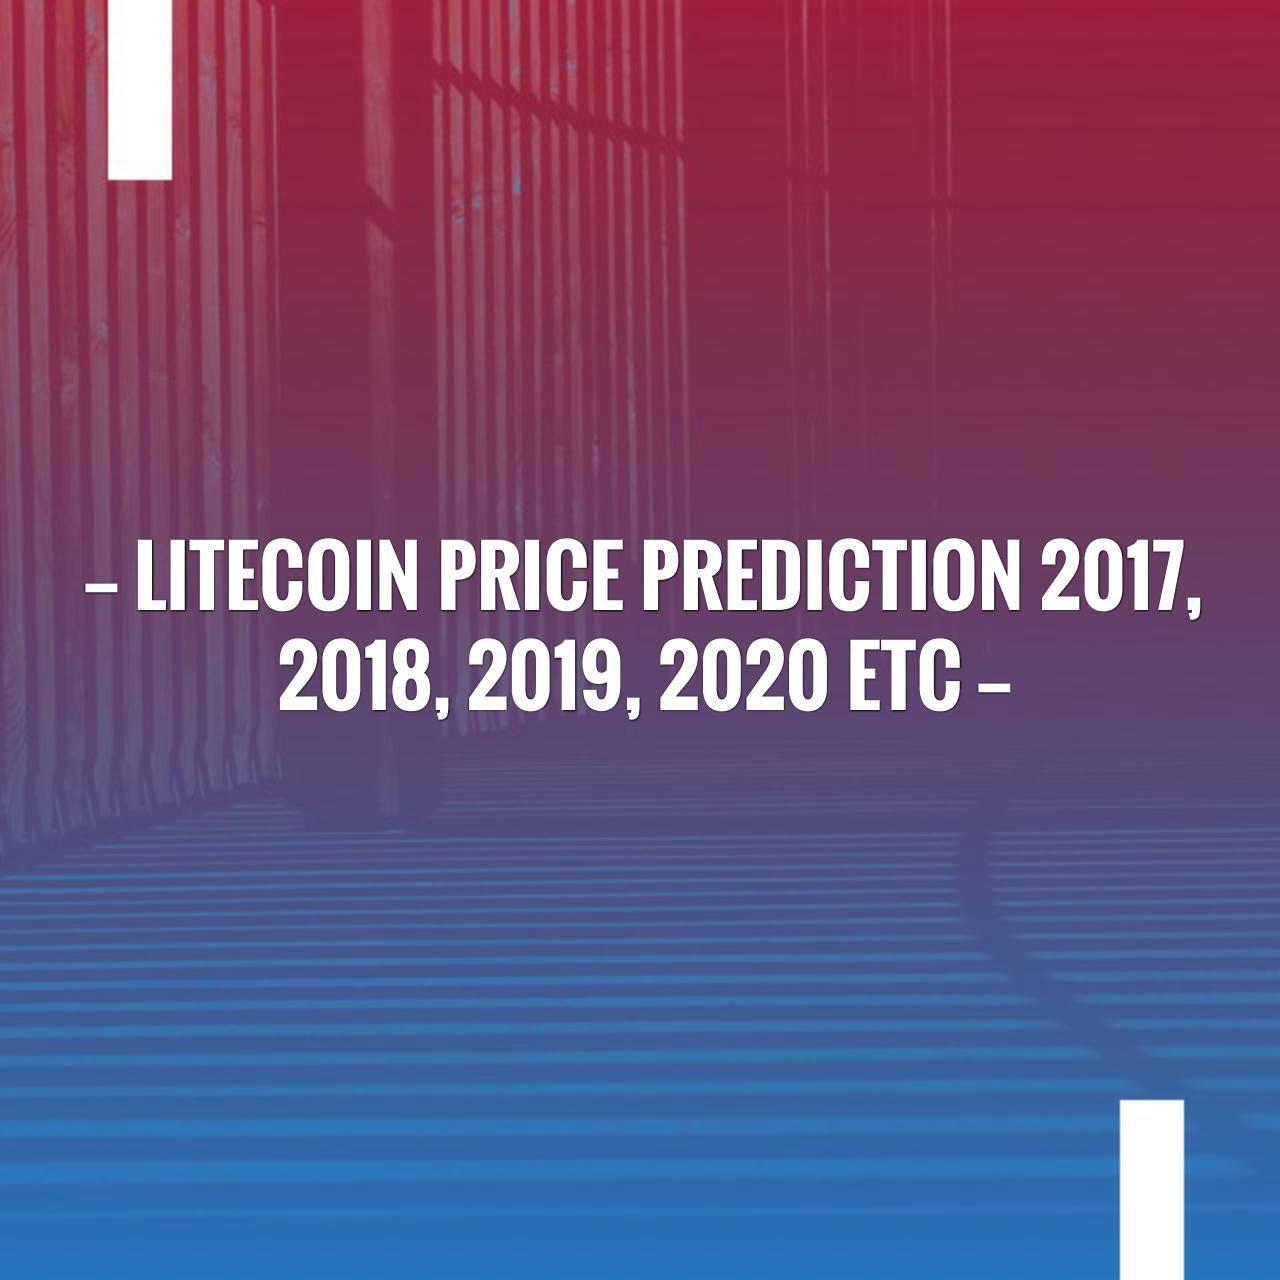 Go ahead and give this a read Litecoin Price Prediction 2018